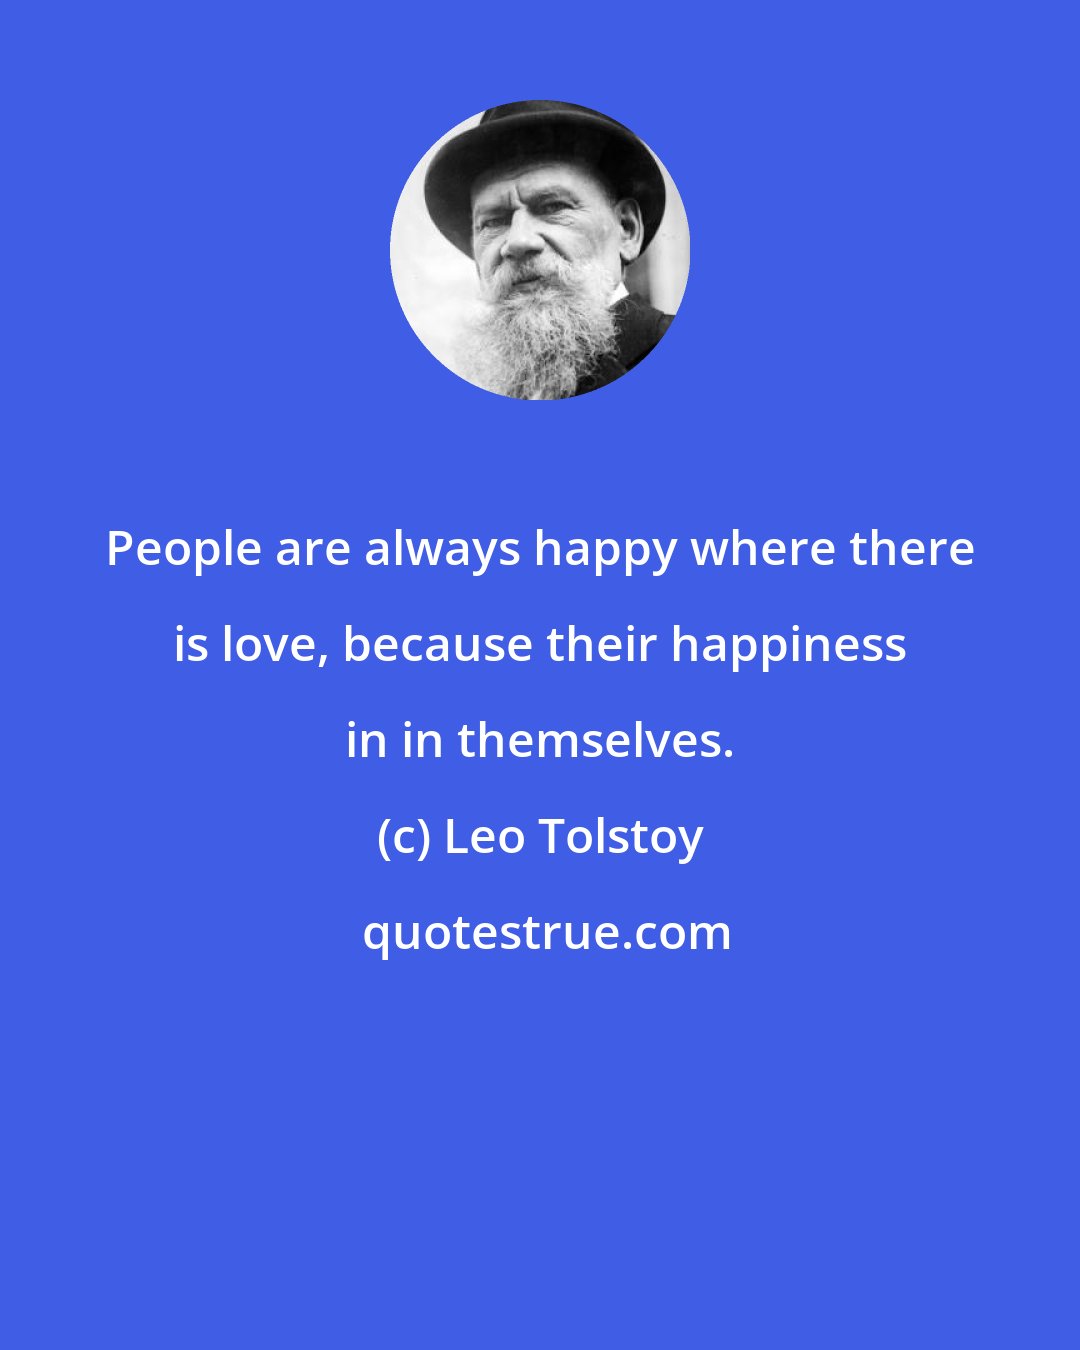 Leo Tolstoy: People are always happy where there is love, because their happiness in in themselves.